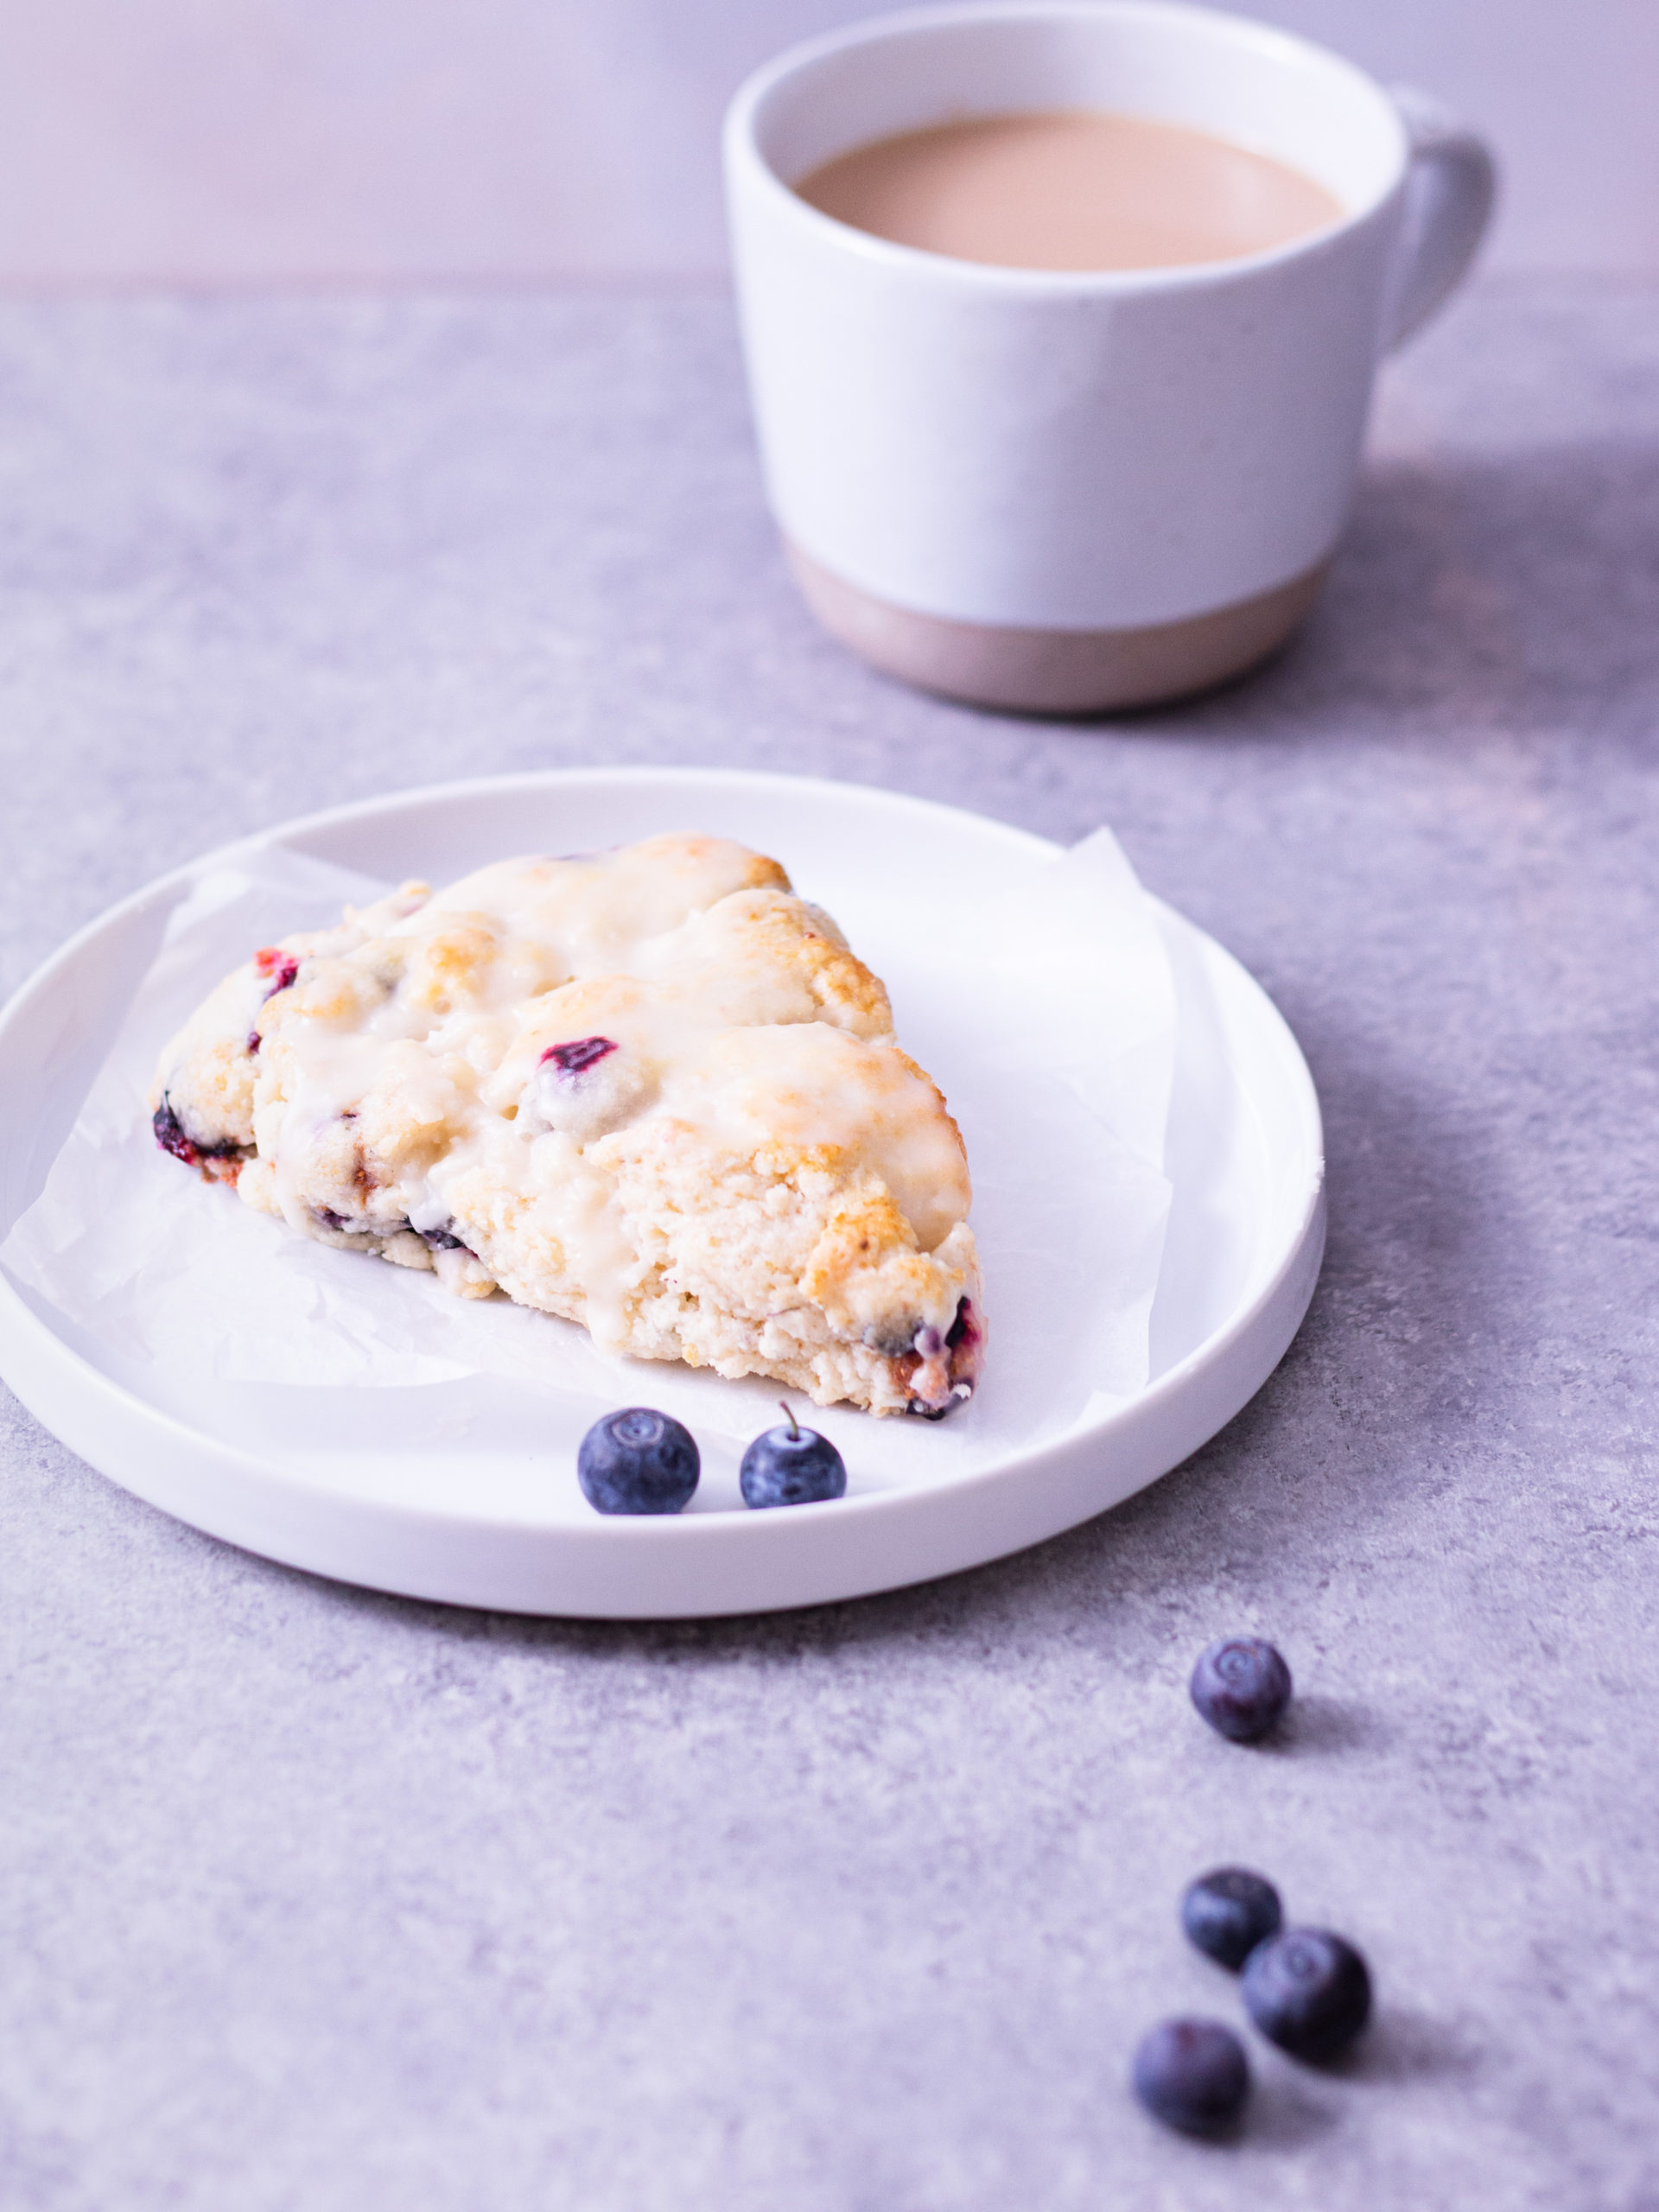 Straight on shot of a blueberry scone on a white plate next to a cup of coffee on a light grey surface.